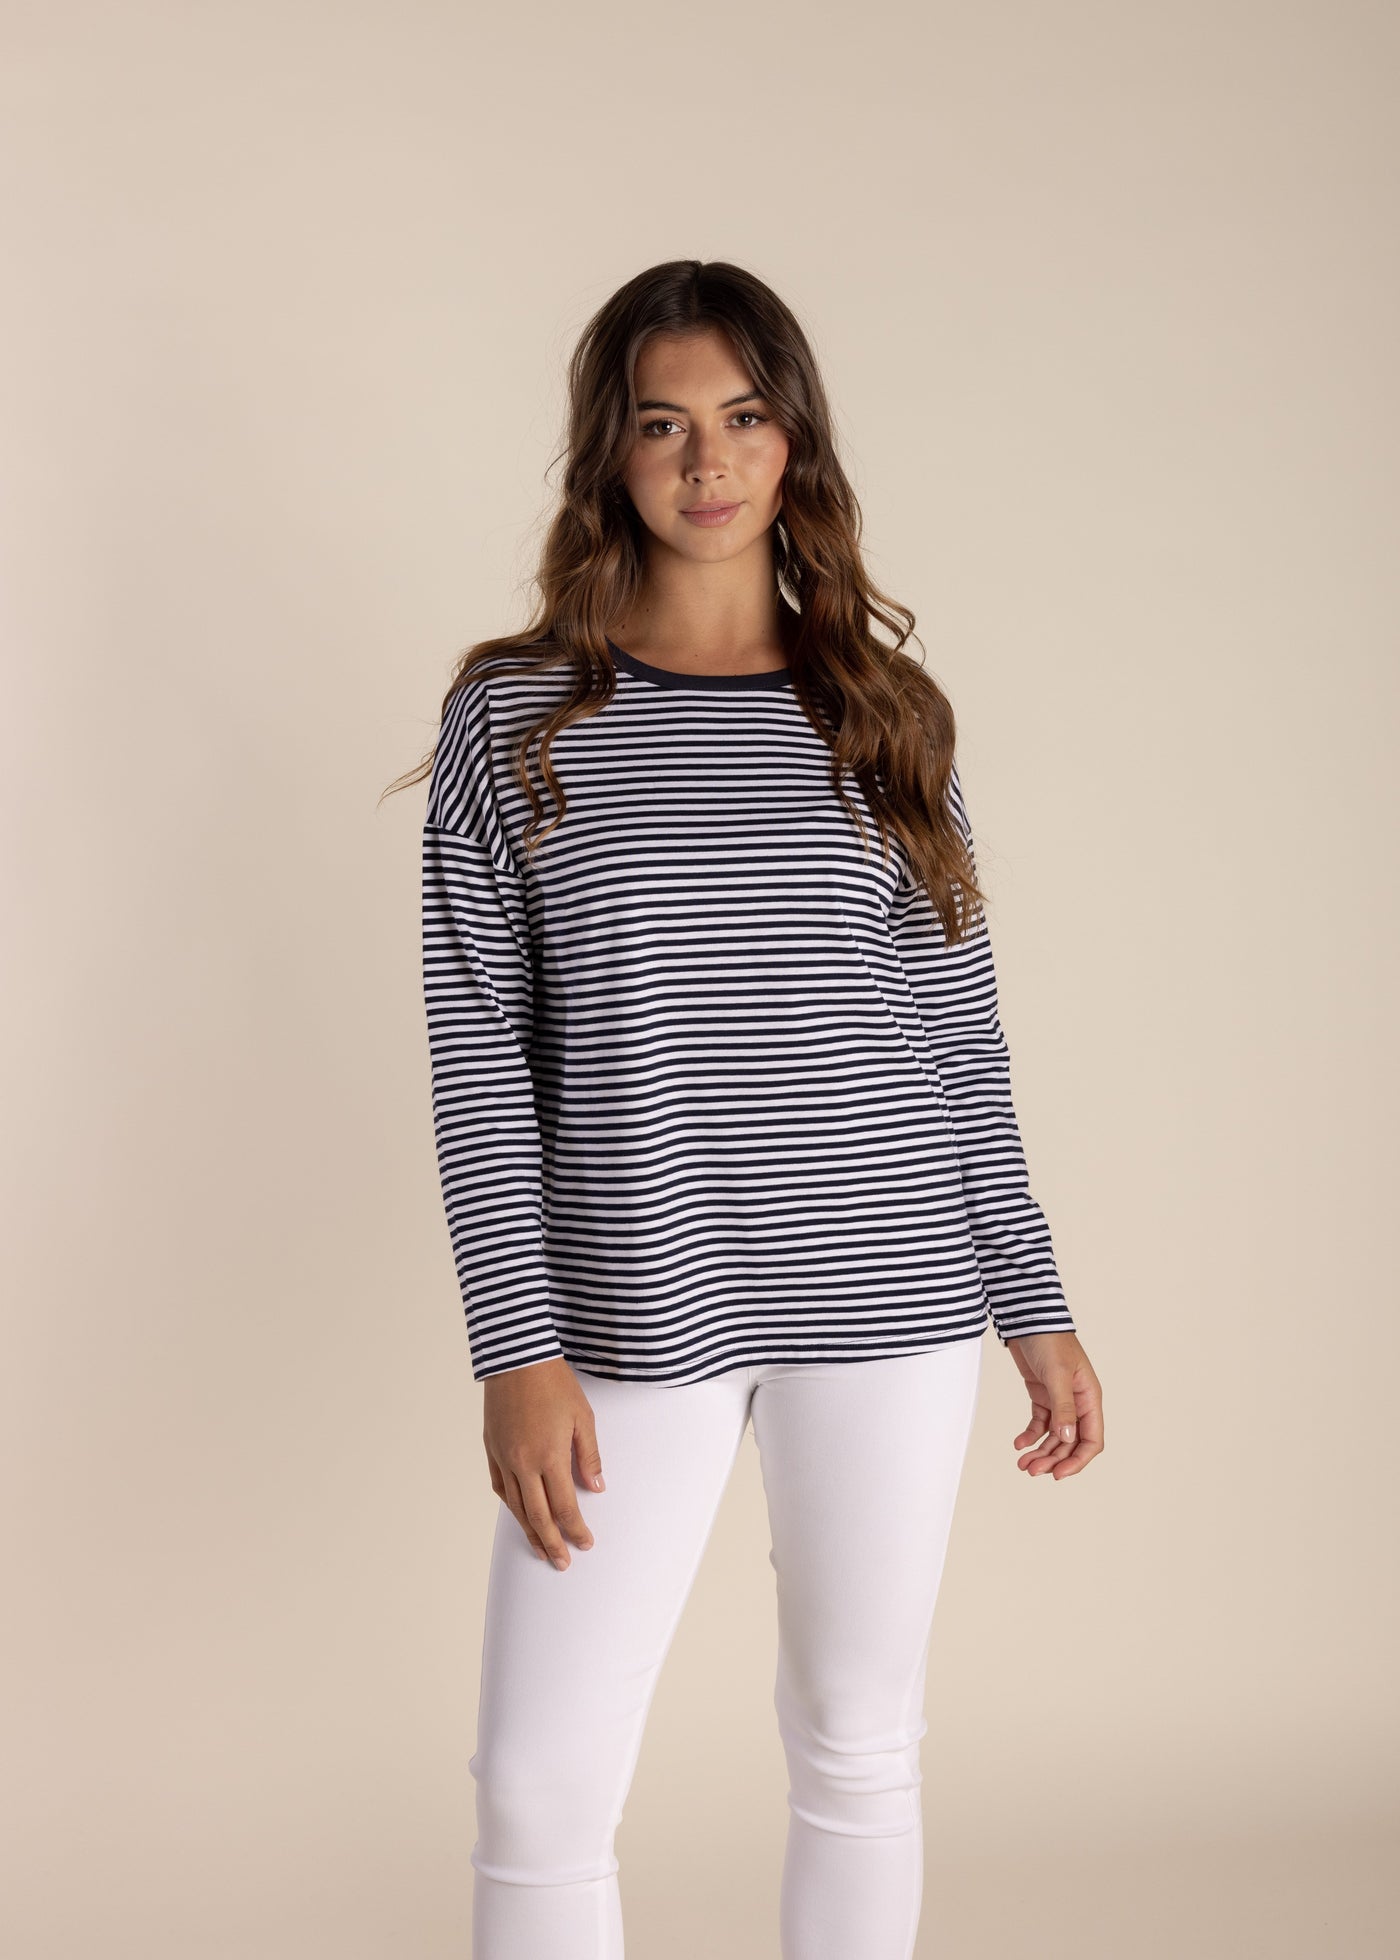 Two T's</p>Long Sleeve Stripe Top</p>(Navy/White)